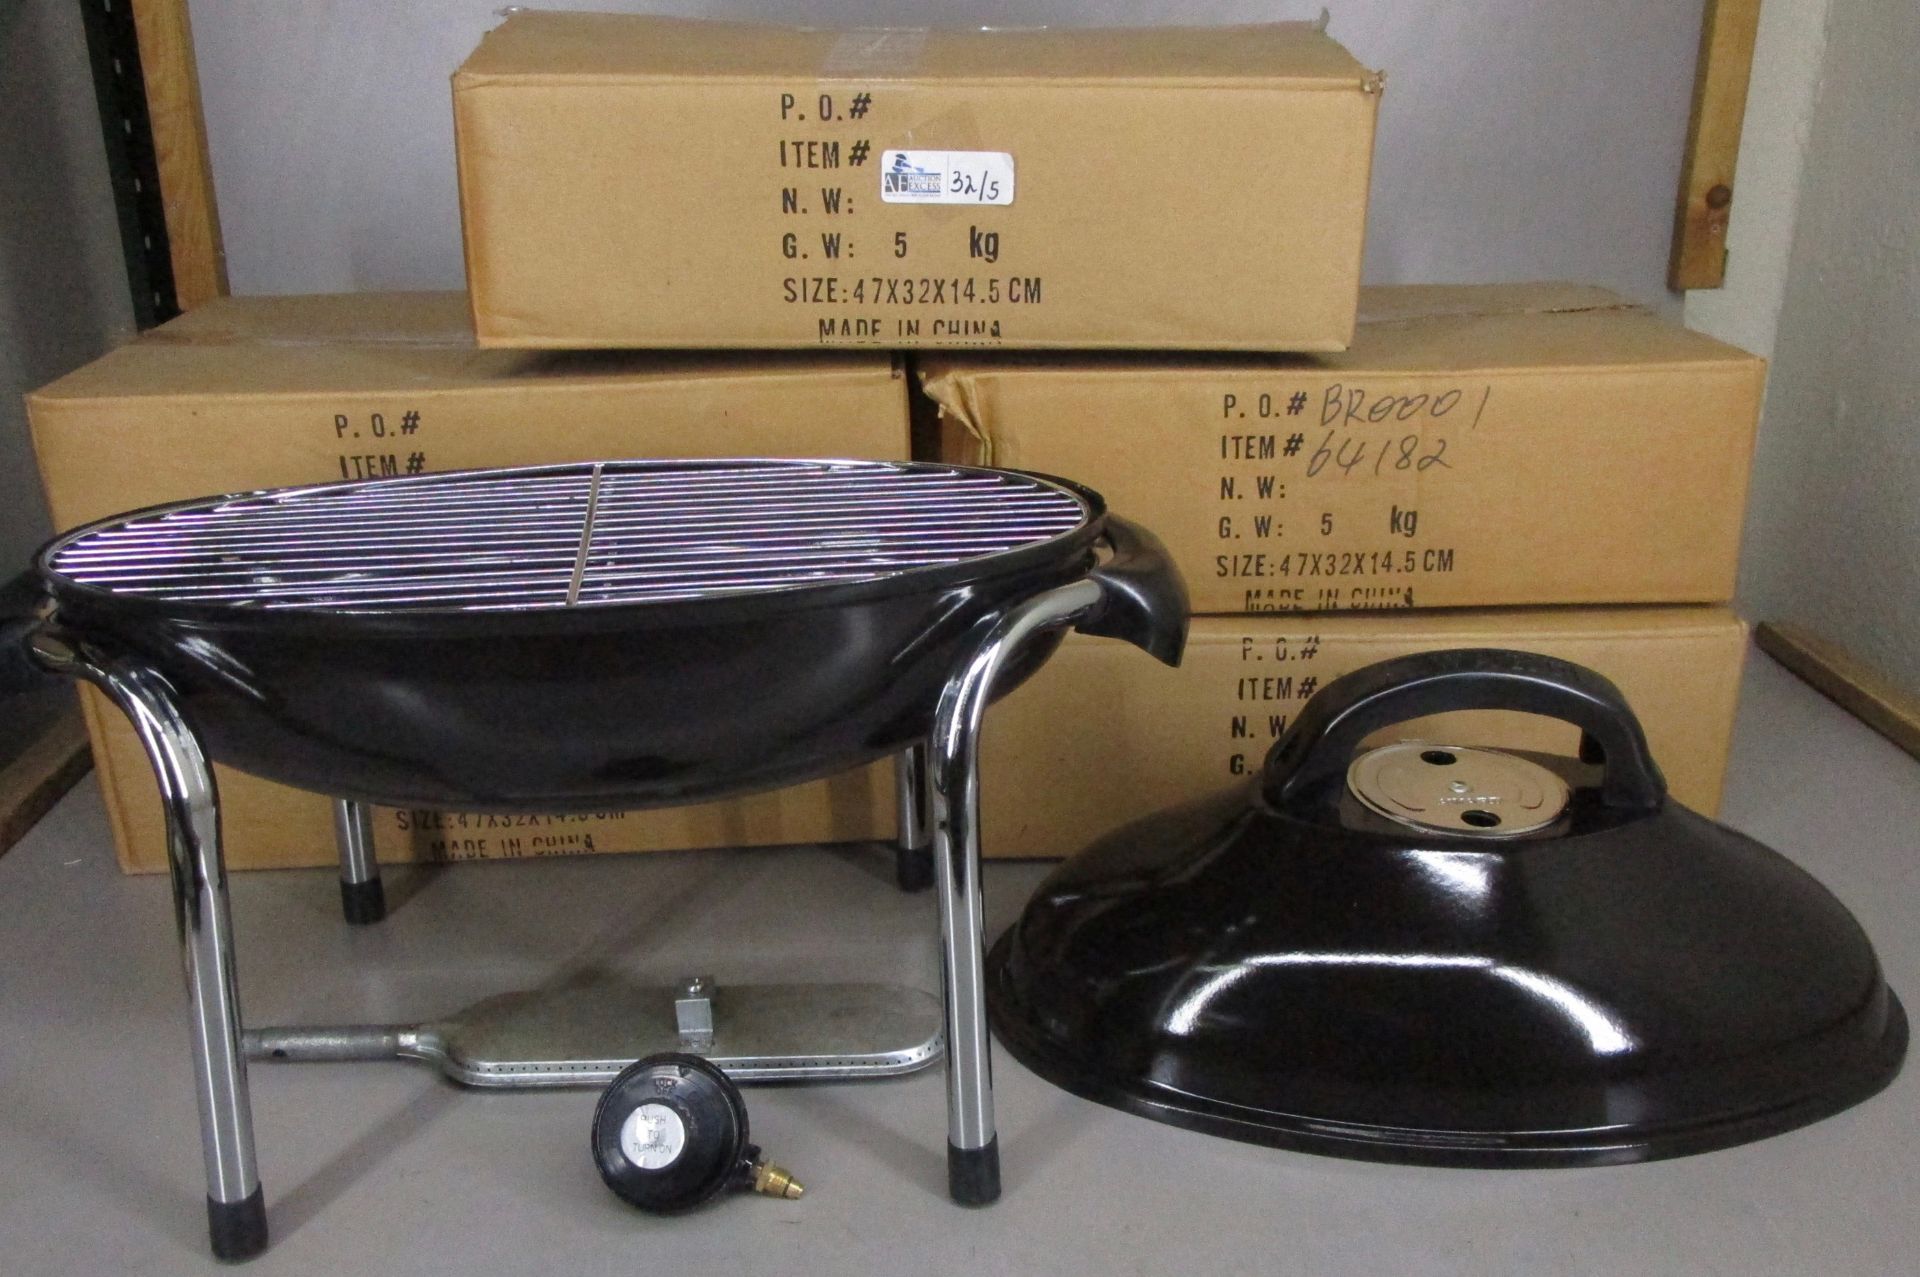 LOT OF 4 PORTABLE GAS BBQ